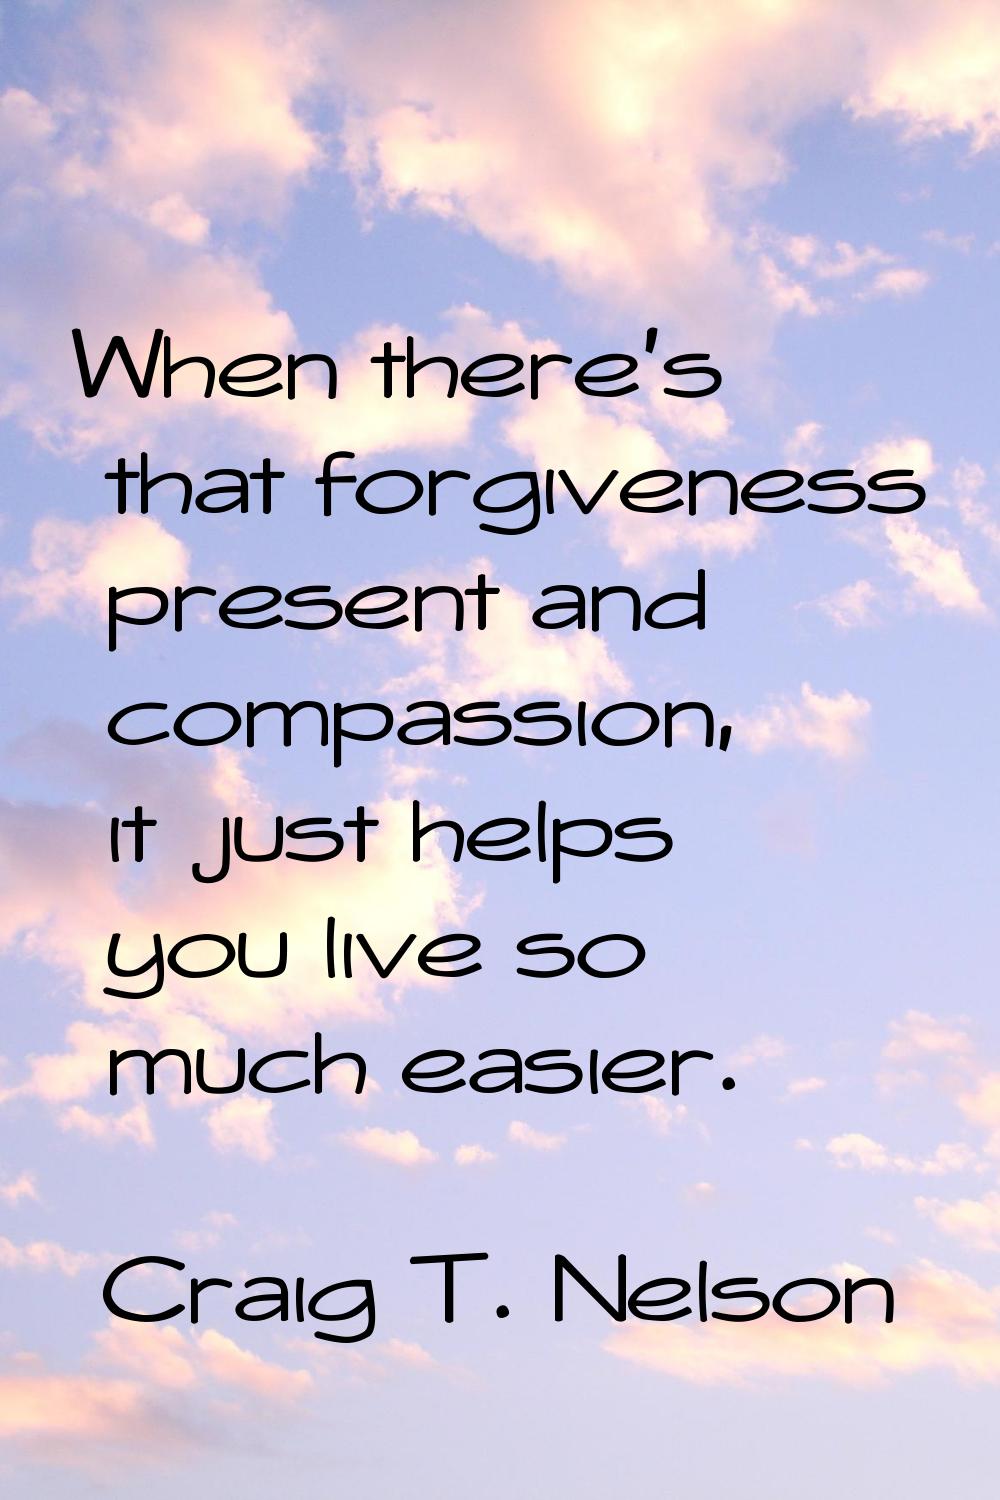 When there's that forgiveness present and compassion, it just helps you live so much easier.